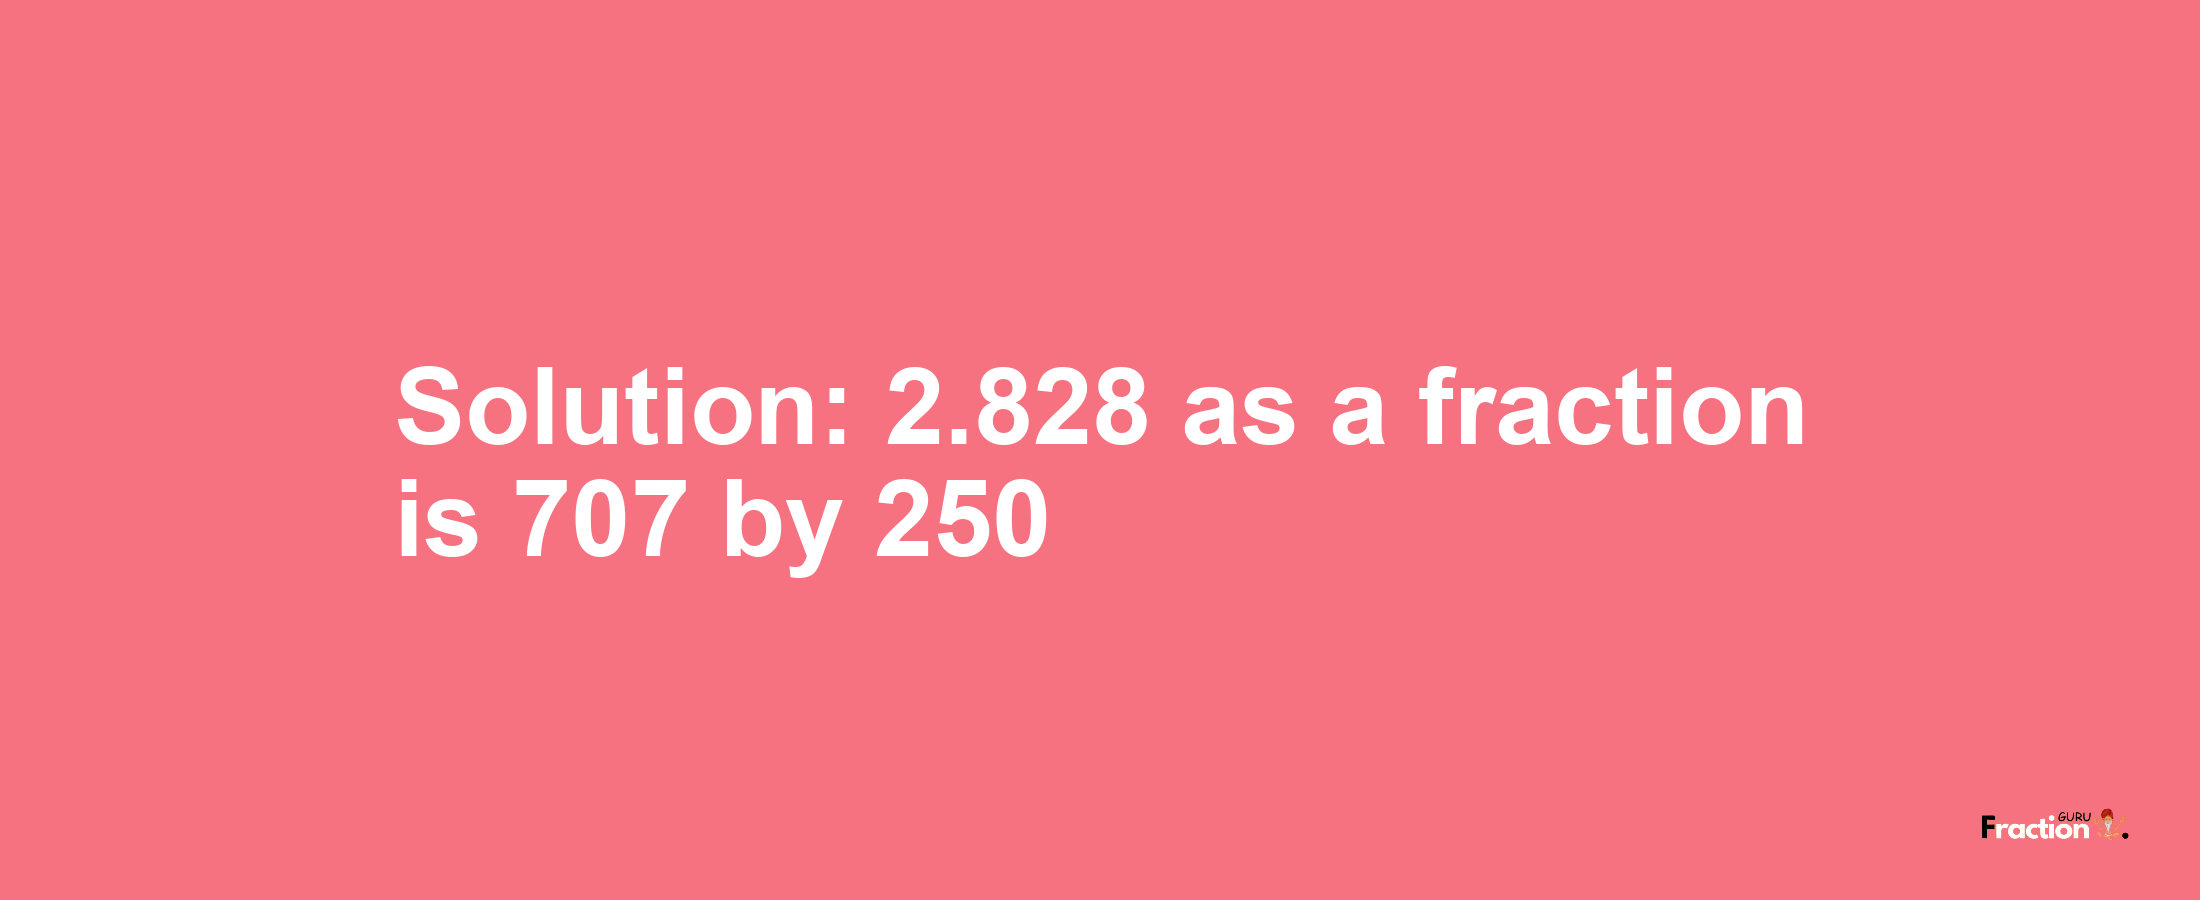 Solution:2.828 as a fraction is 707/250